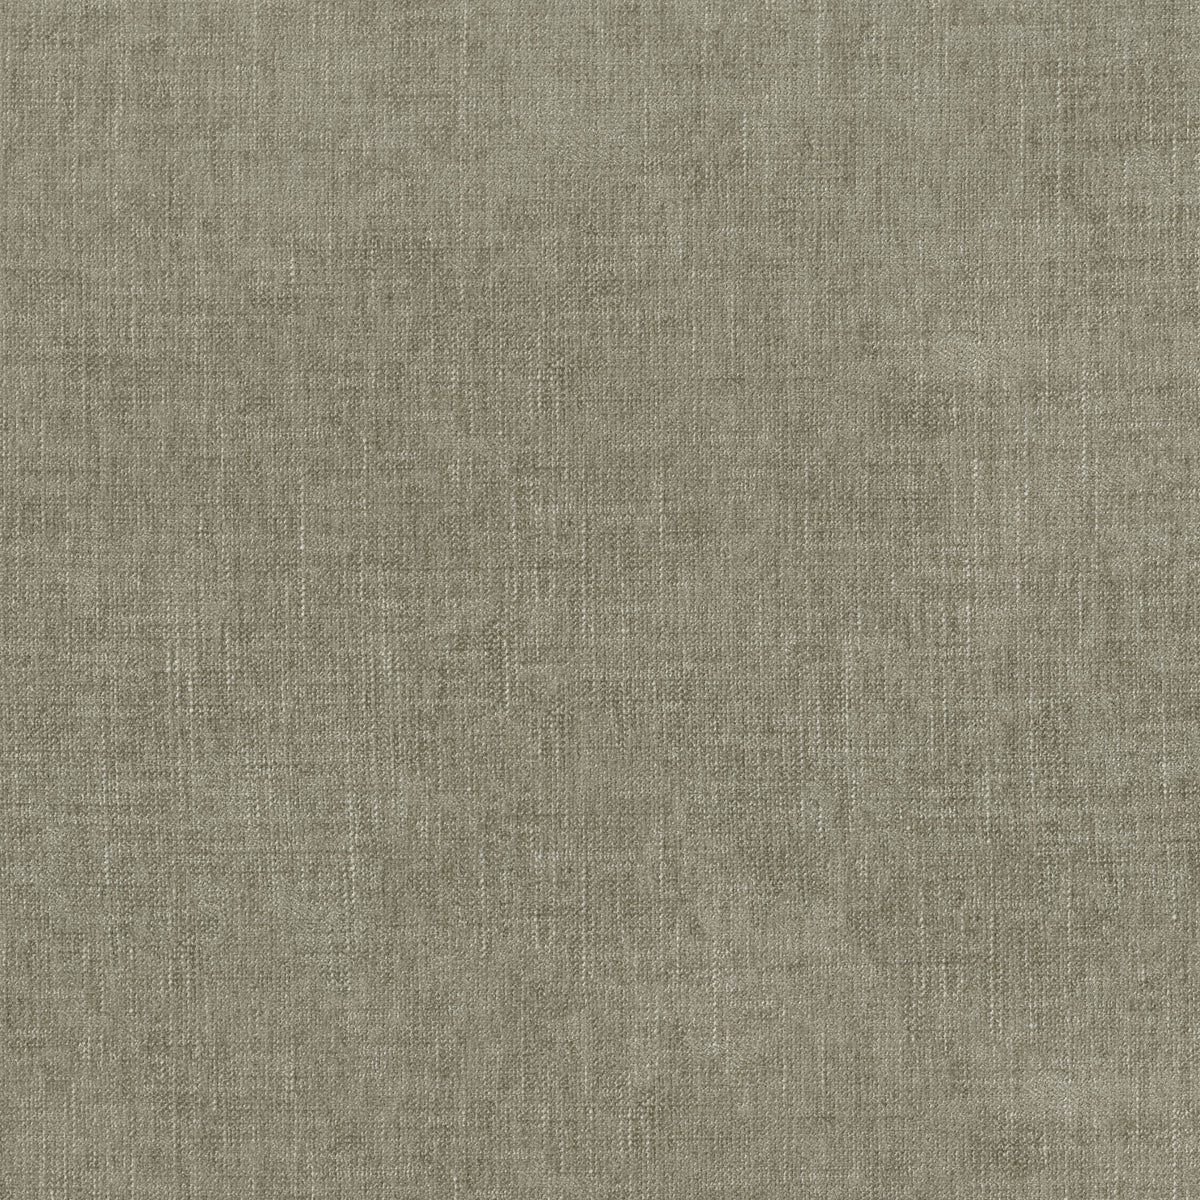 Performance + Remy - Taupe 409422 Upholstery Fabric